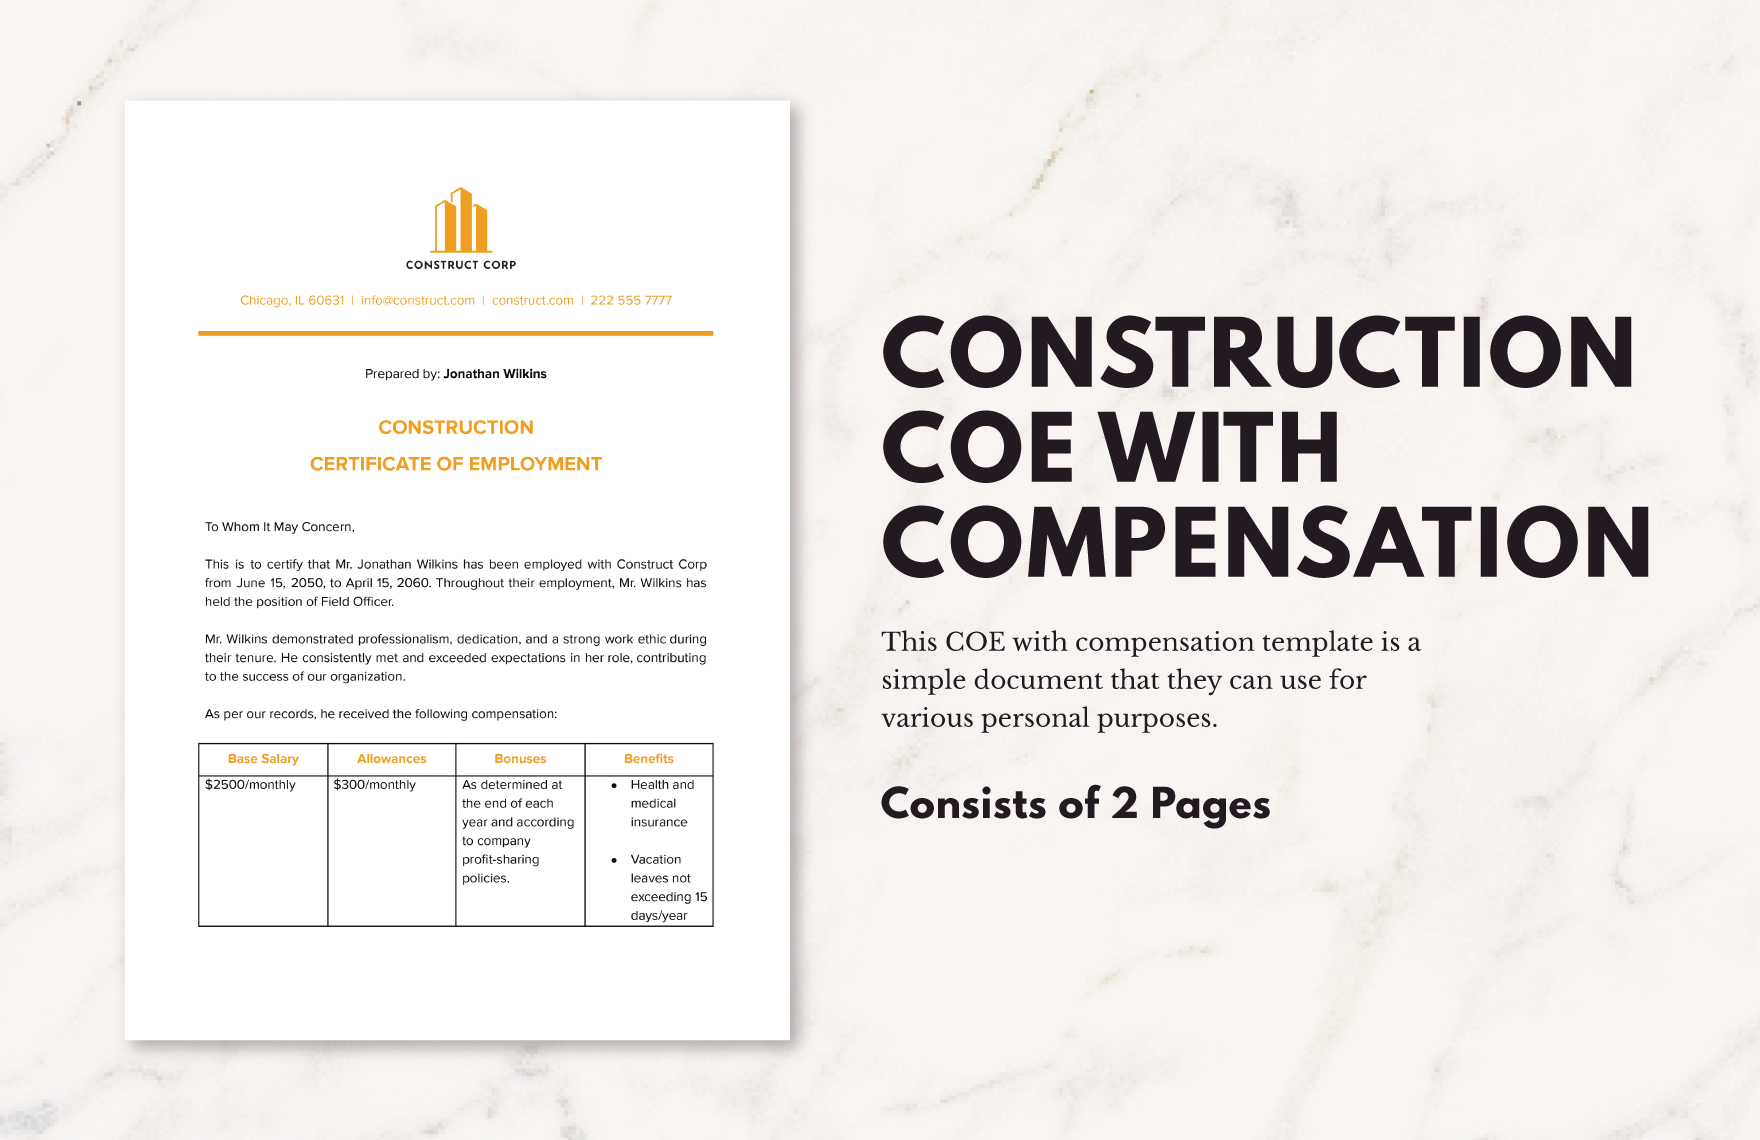 Construction COE With Compensation